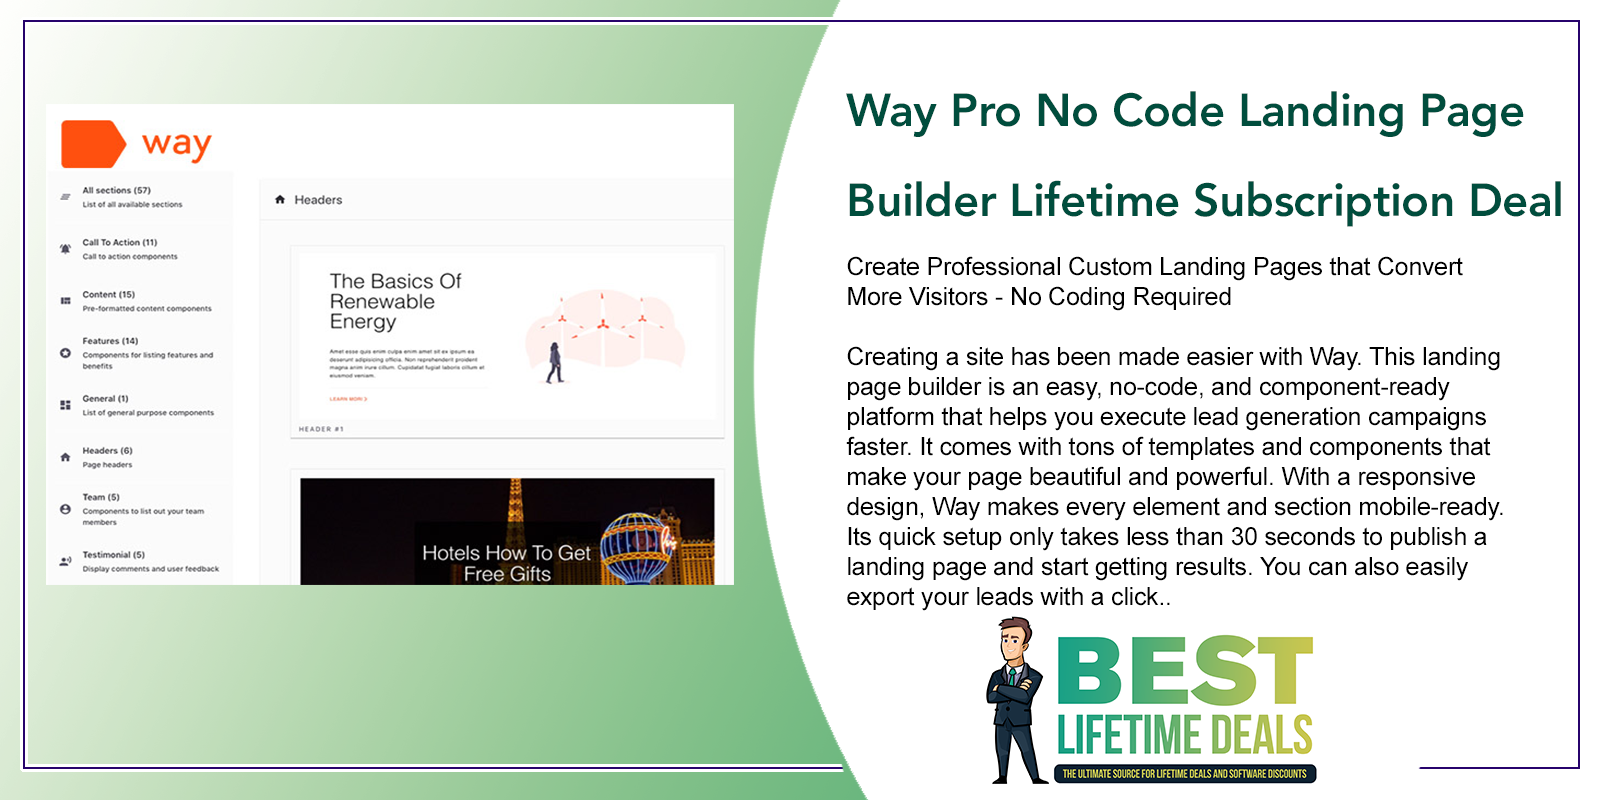 Way Pro No Code Landing Page Builder Lifetime Subscription Deal Featured Image